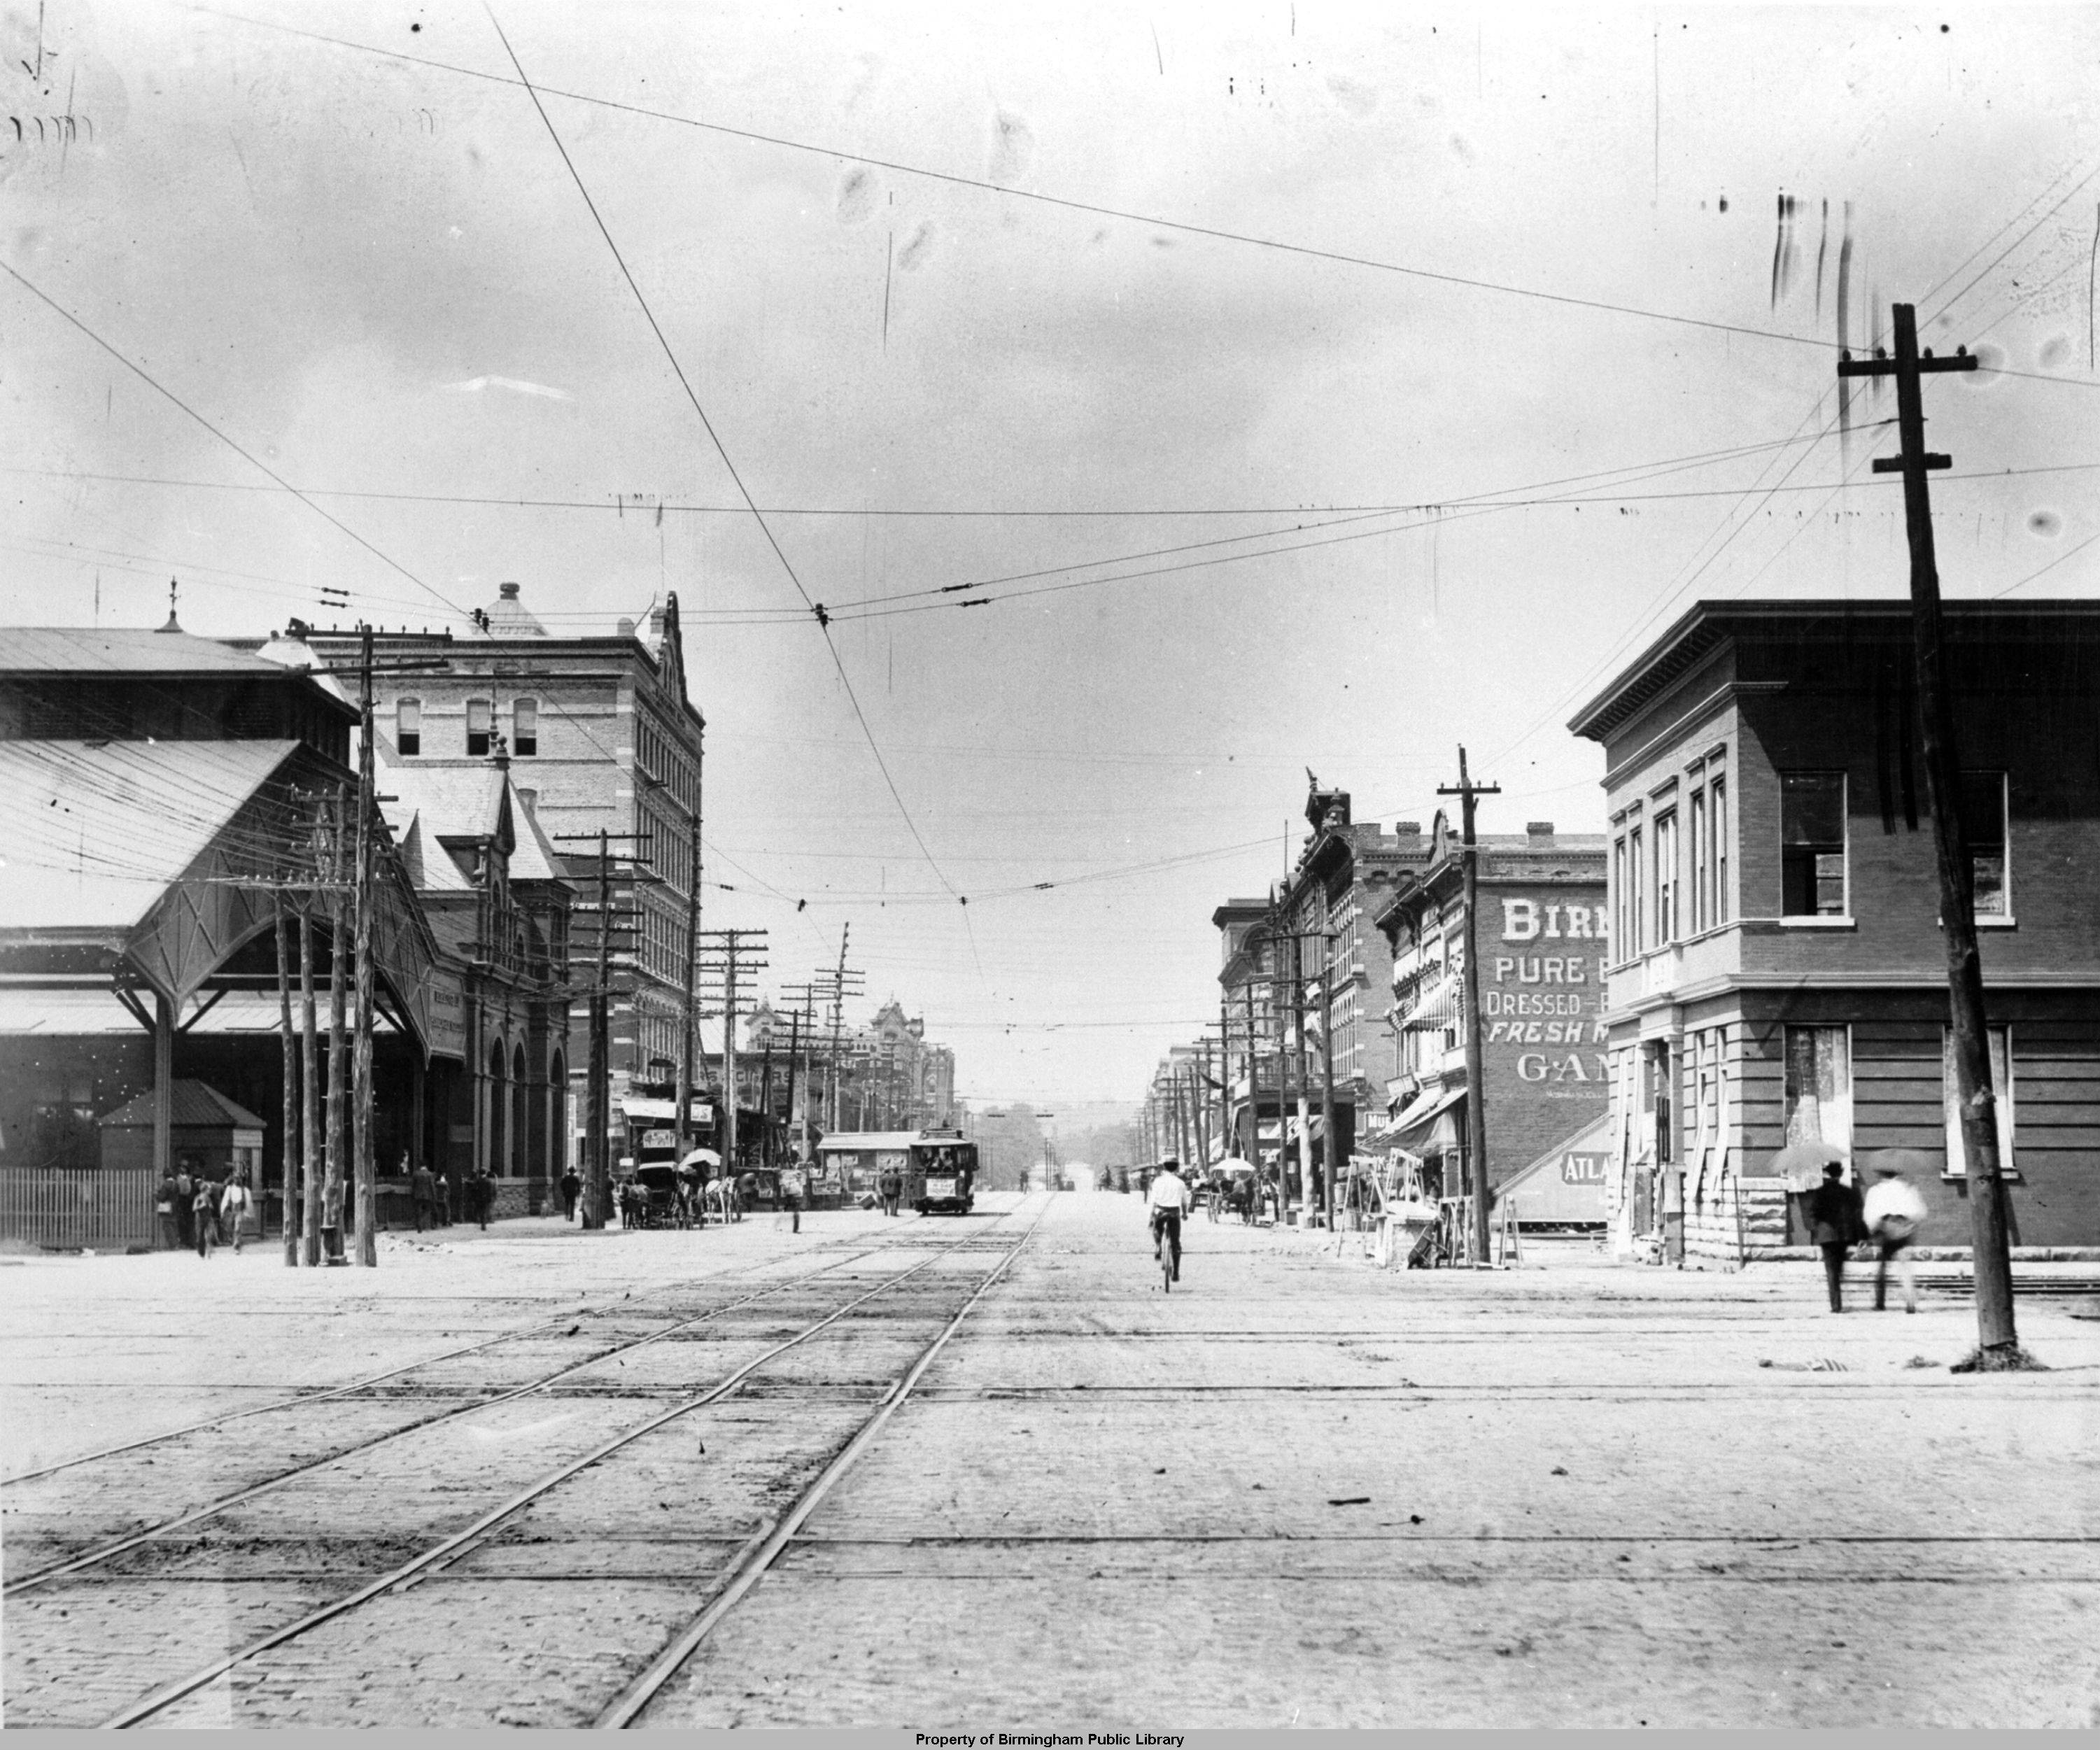 PATRON – On April 9, 1874 – Three street cars for Montgomery passed down the road on a freight train in Tuscaloosa